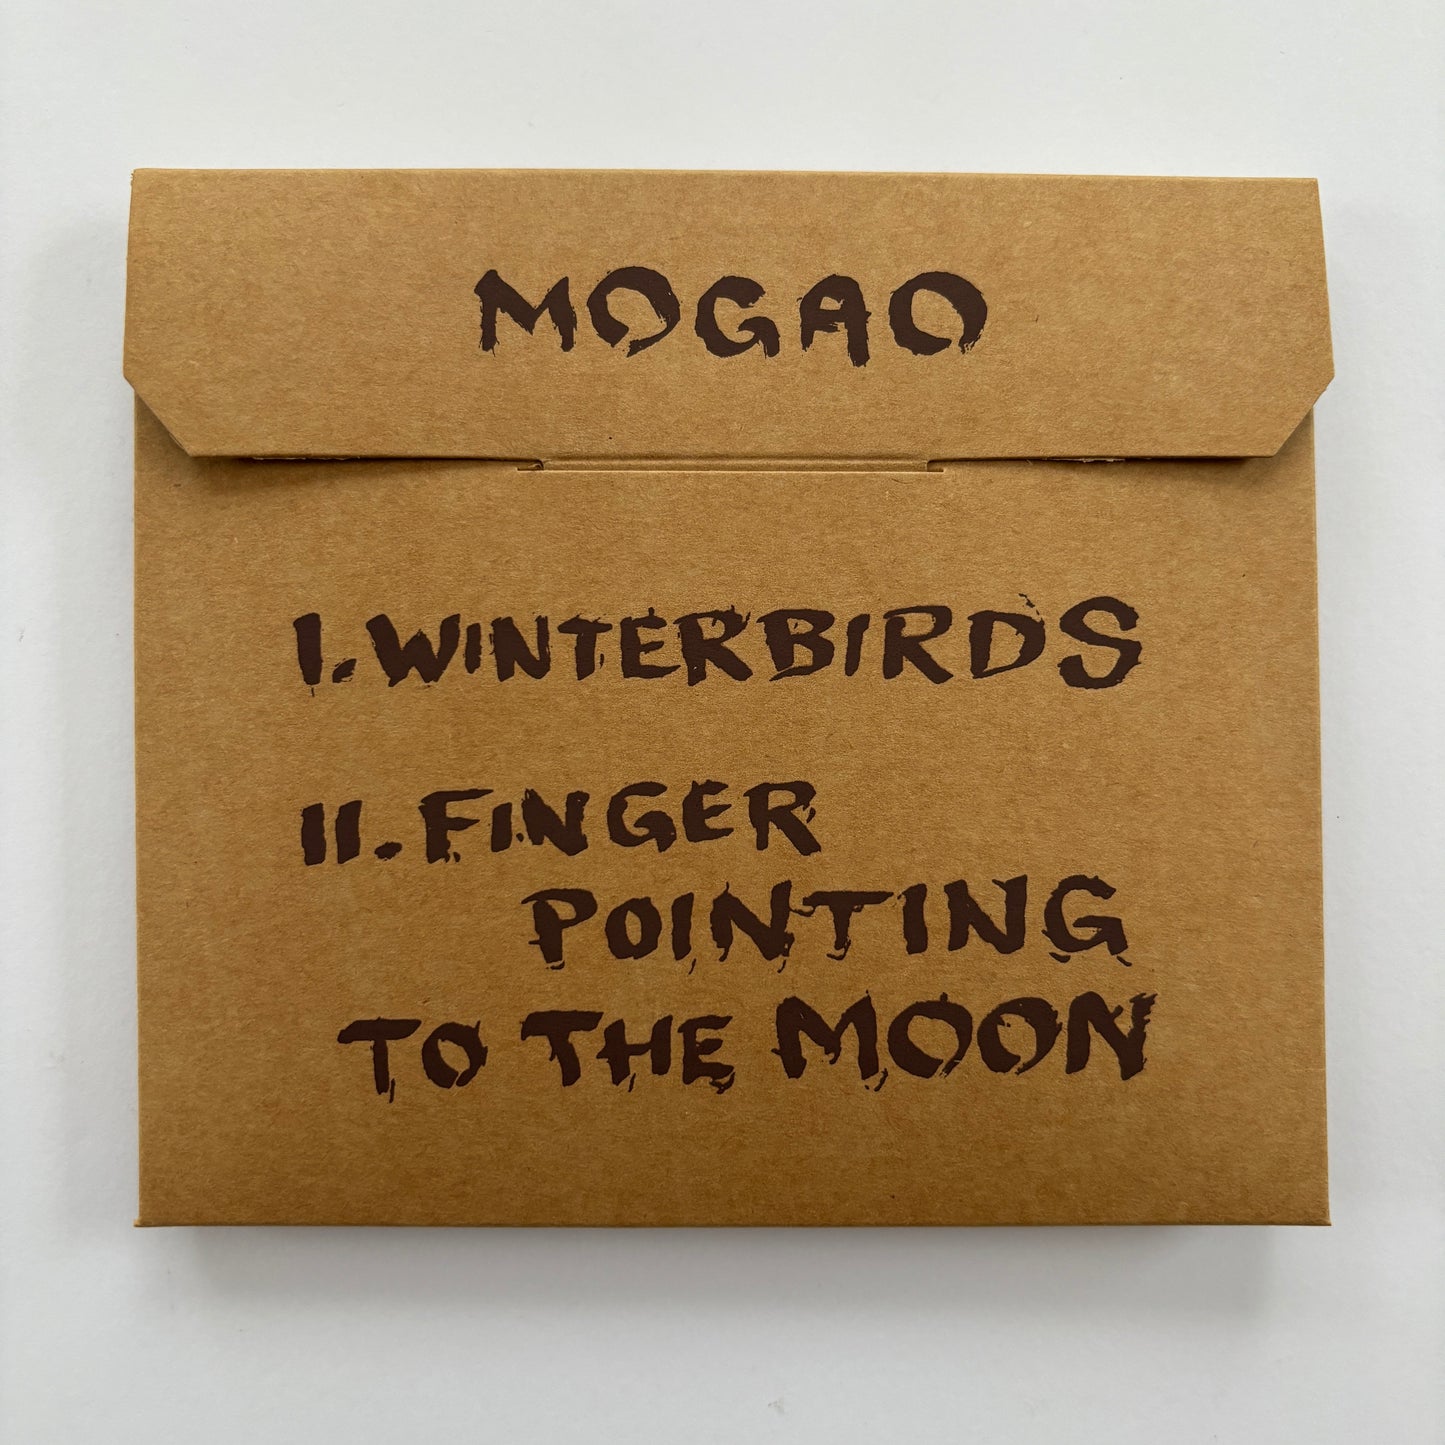 Mogao - Finger Pointing To The Moon CD